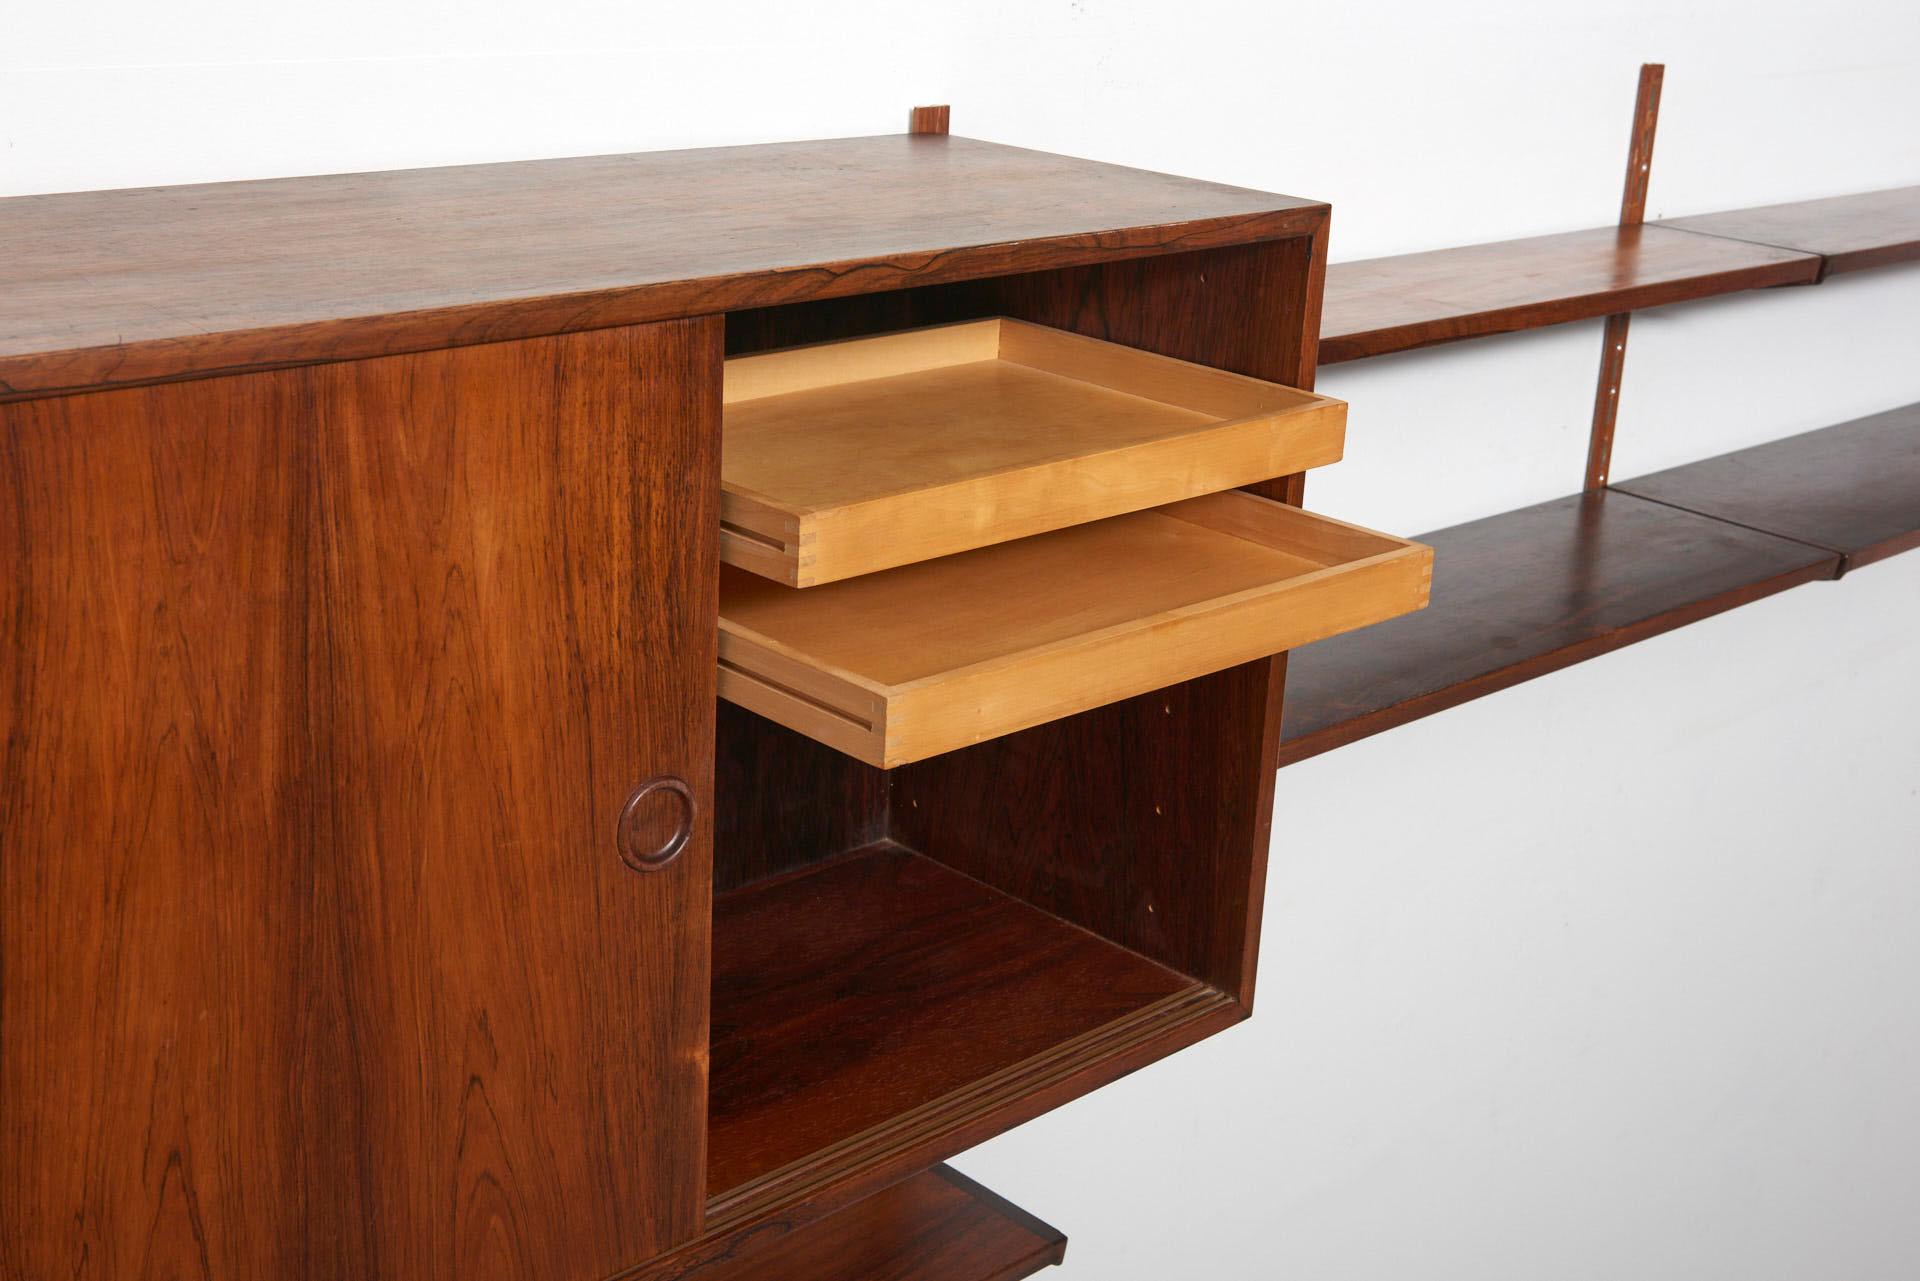 20th Century Teak Rosewood Wall Unit by Kai Kristiansen for FM Møbler, 1960s For Sale